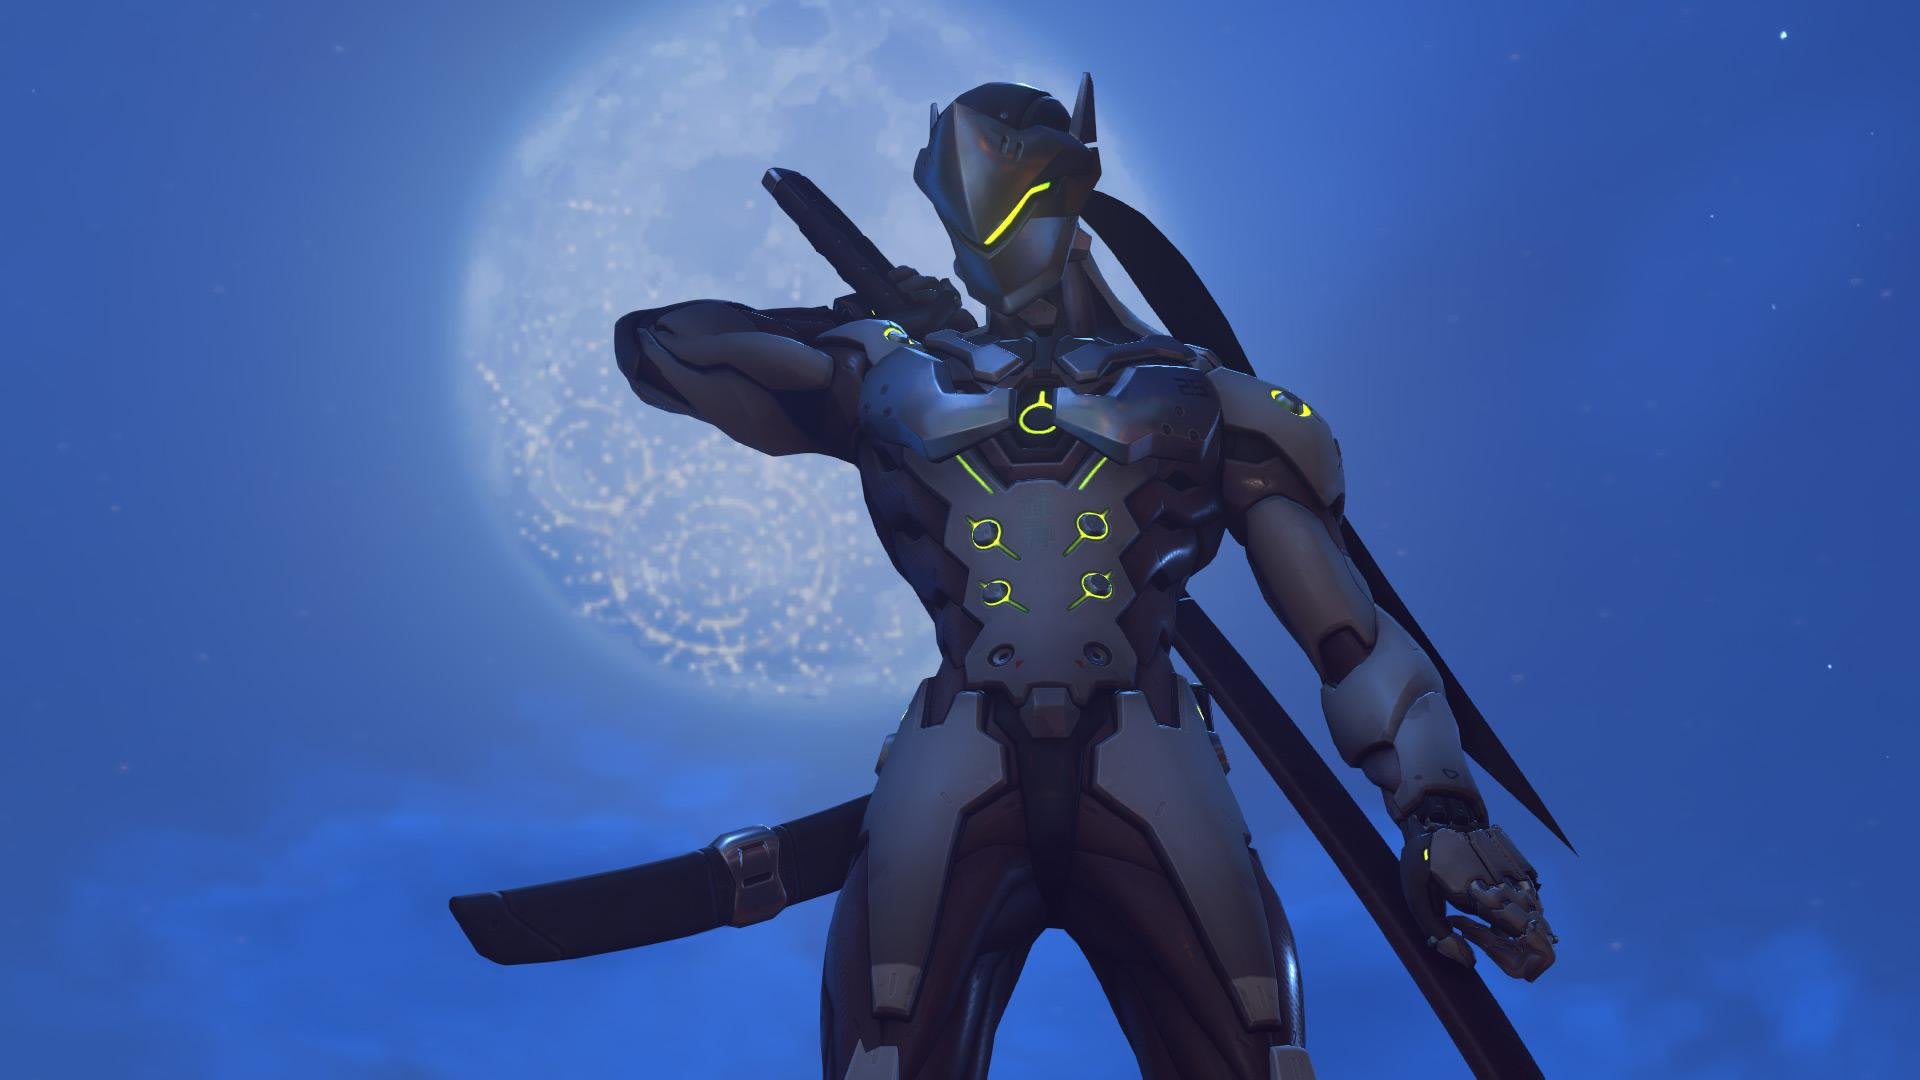 Got this sick ass Genji Dragonblade from (I wanted the